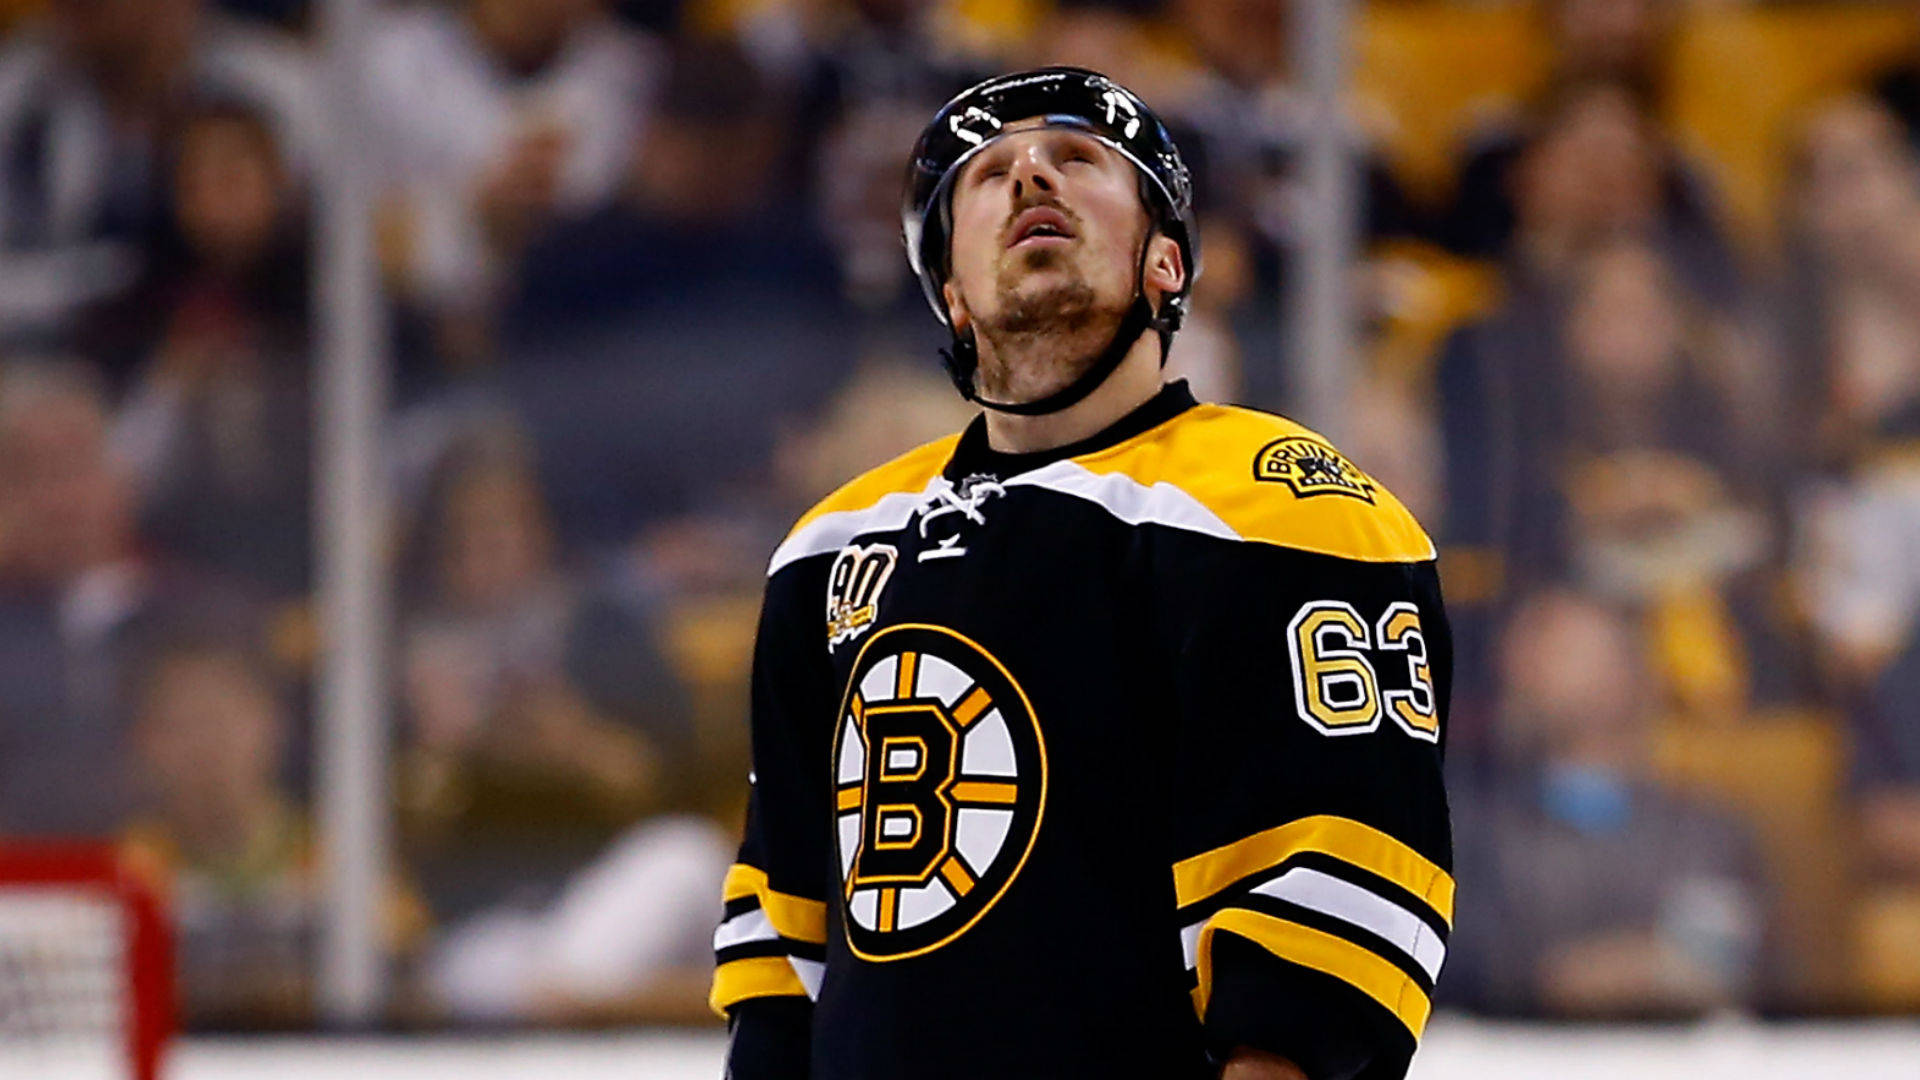 Professional Ice Hockey Star Brad Marchand In Action